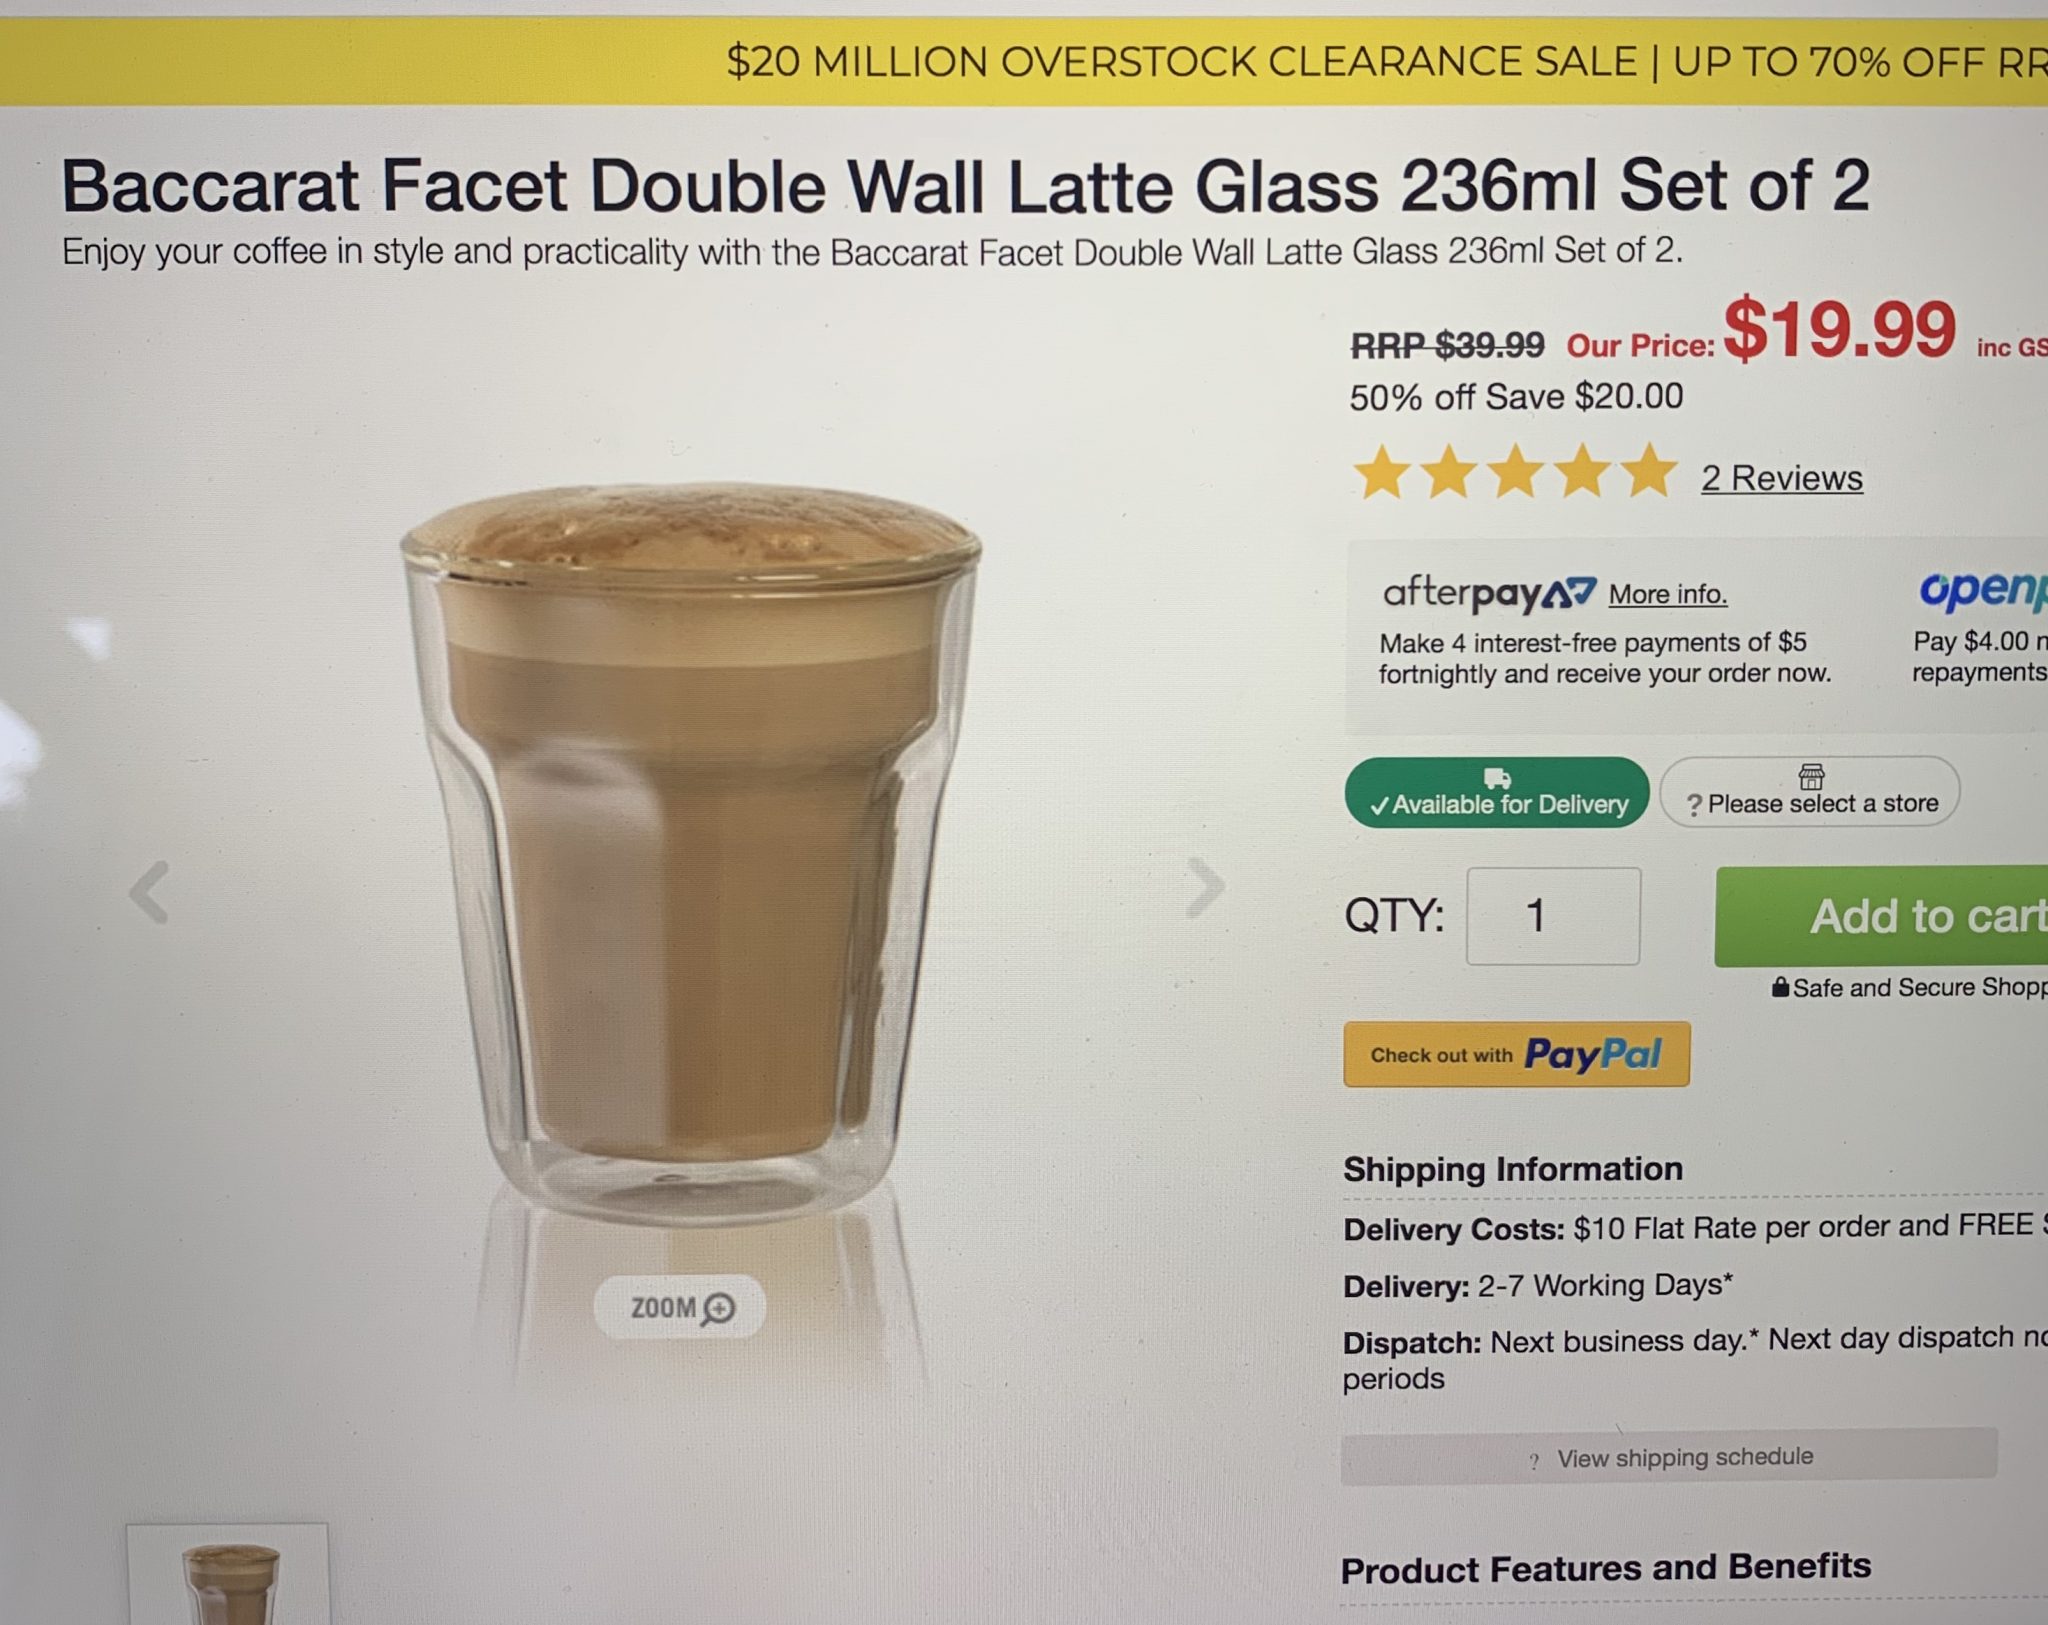 Baccarat Facet Double Wall Latte Glass 236ml set of 2